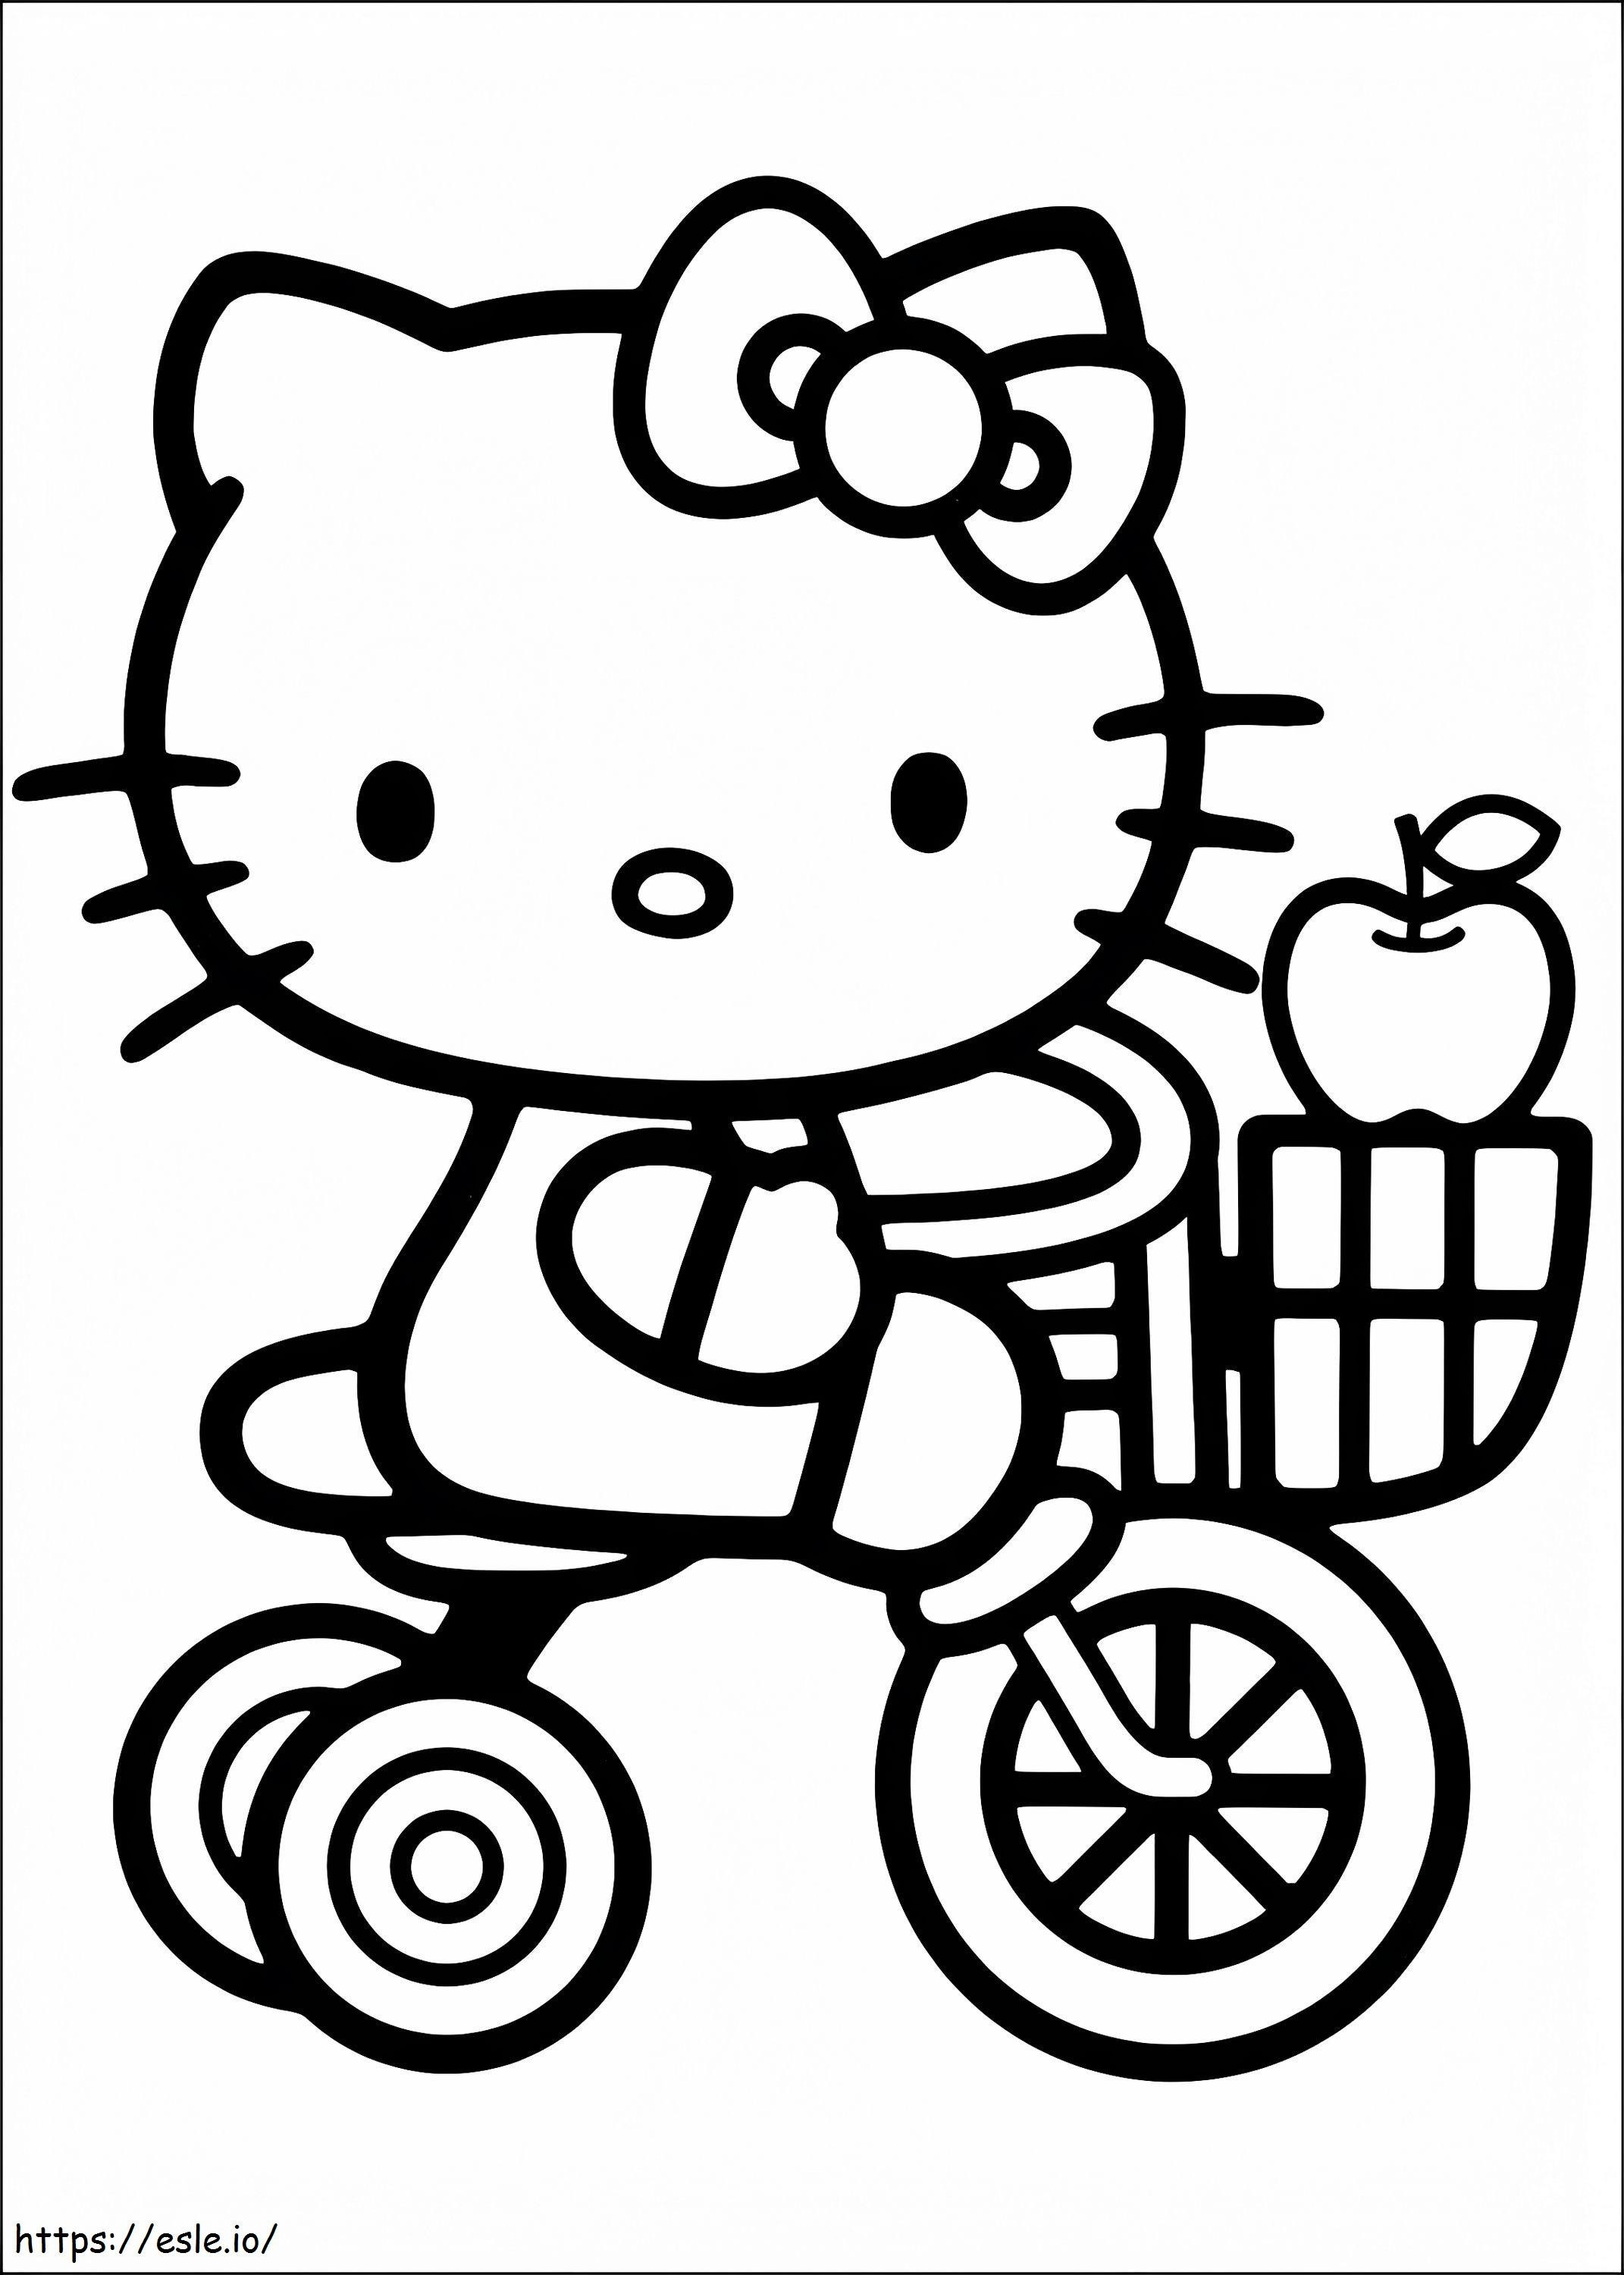 1534321139 Hello Kitty Cycling A4 coloring page